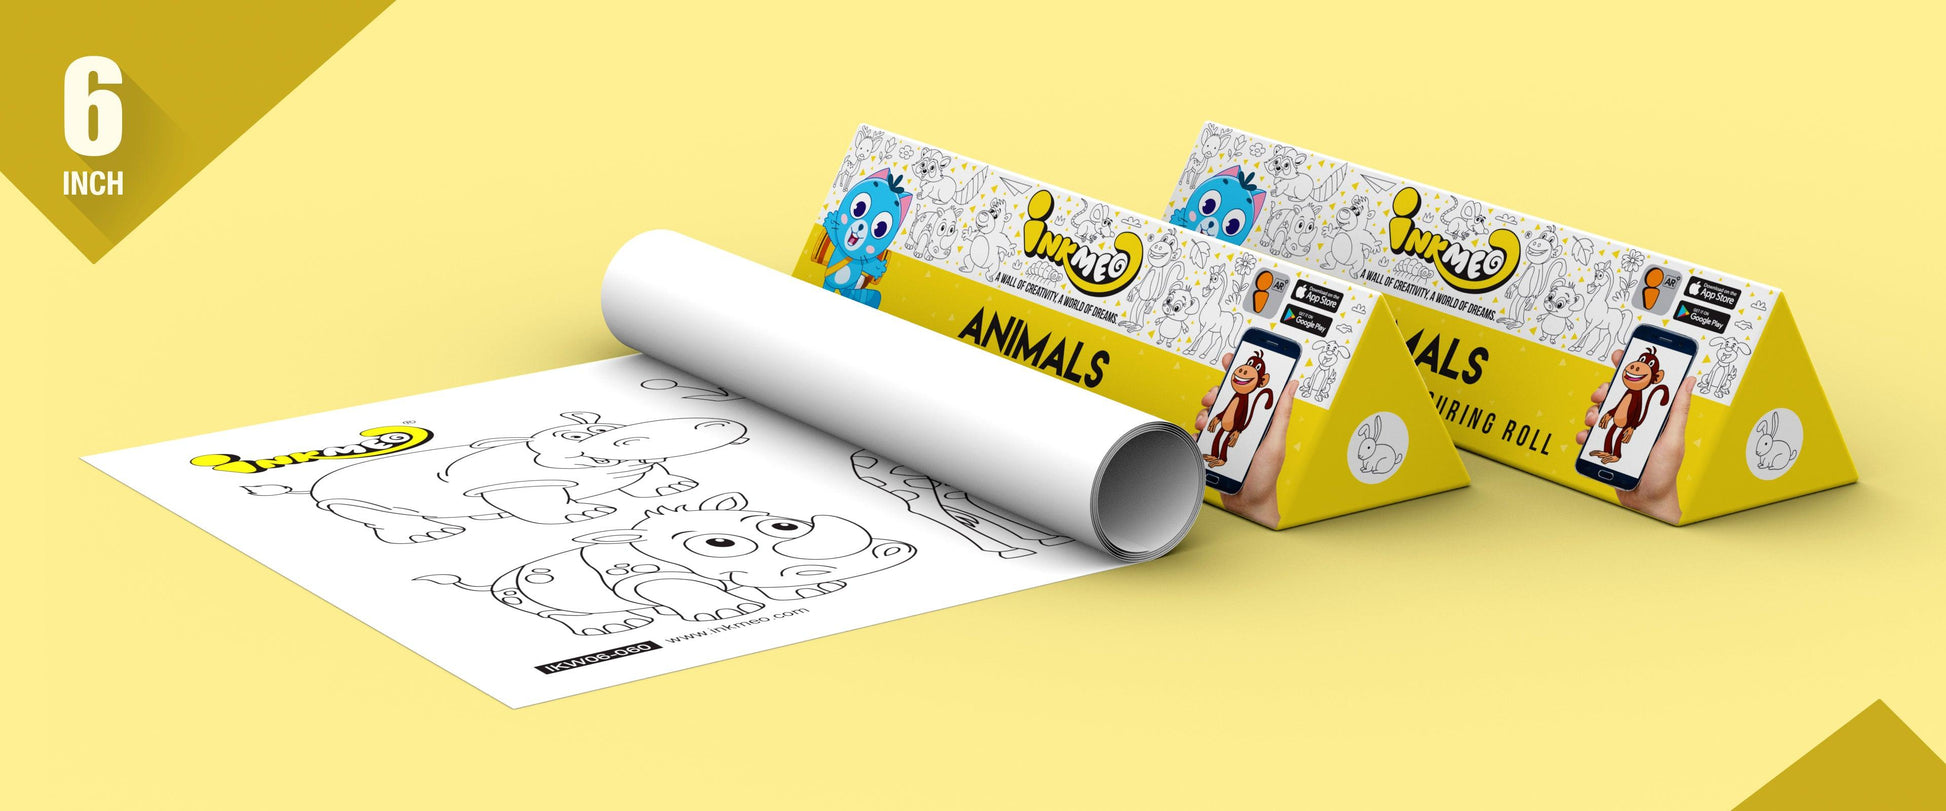 The image depicts two 6*40-inch yellow triangular animals boxes placed alongside each other, with a sheet rolled out next to them.